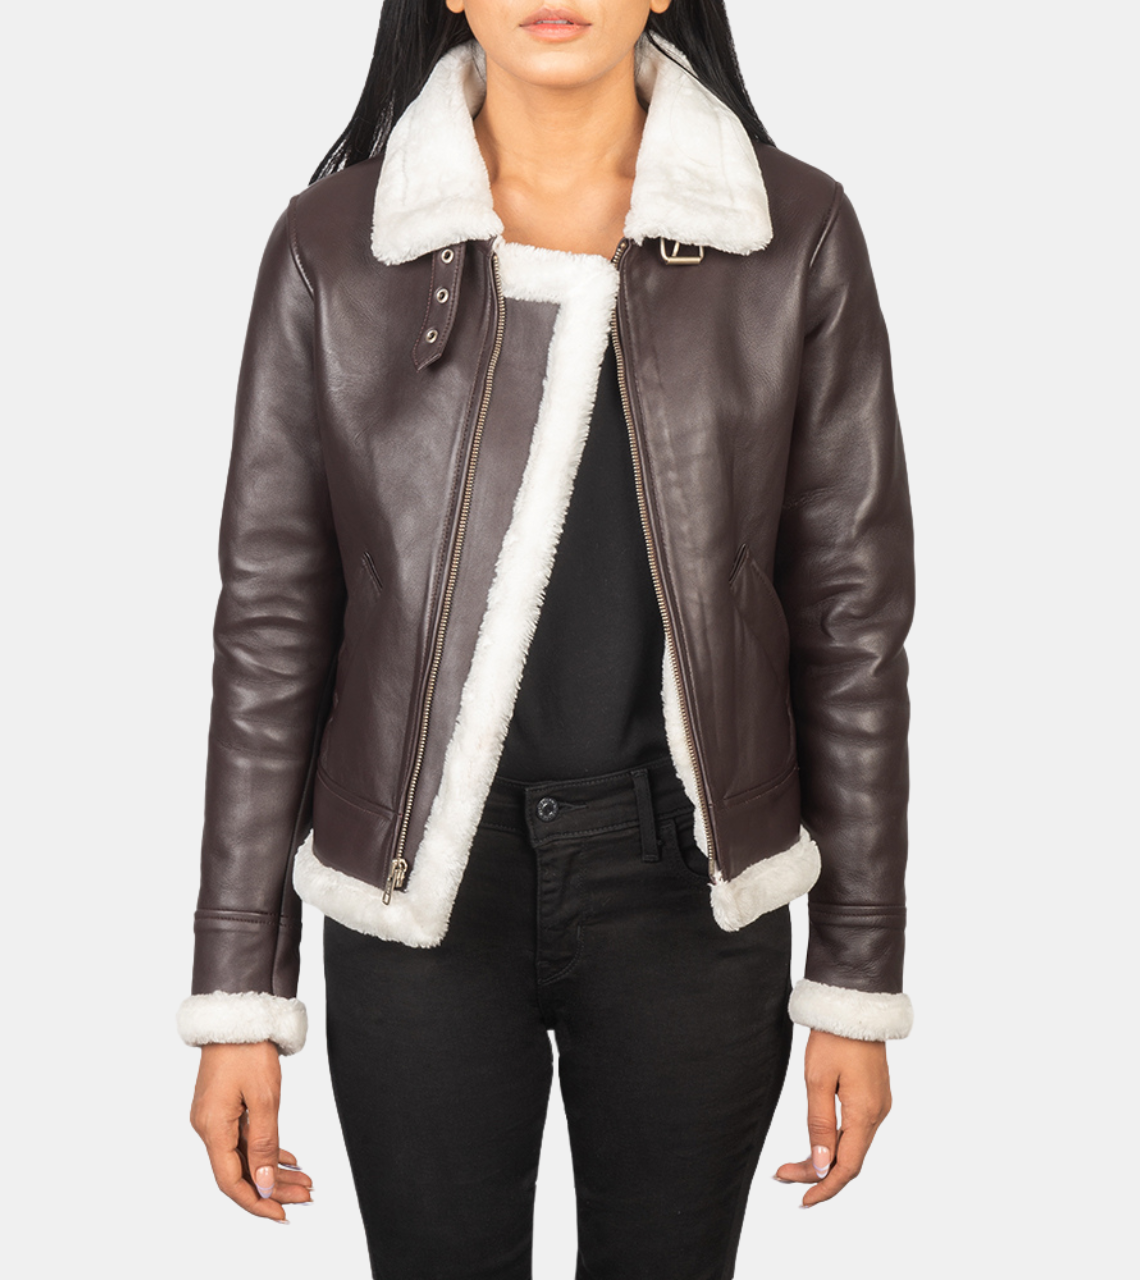 Women's Tan Brown Bomber Shearling Leather Jacket